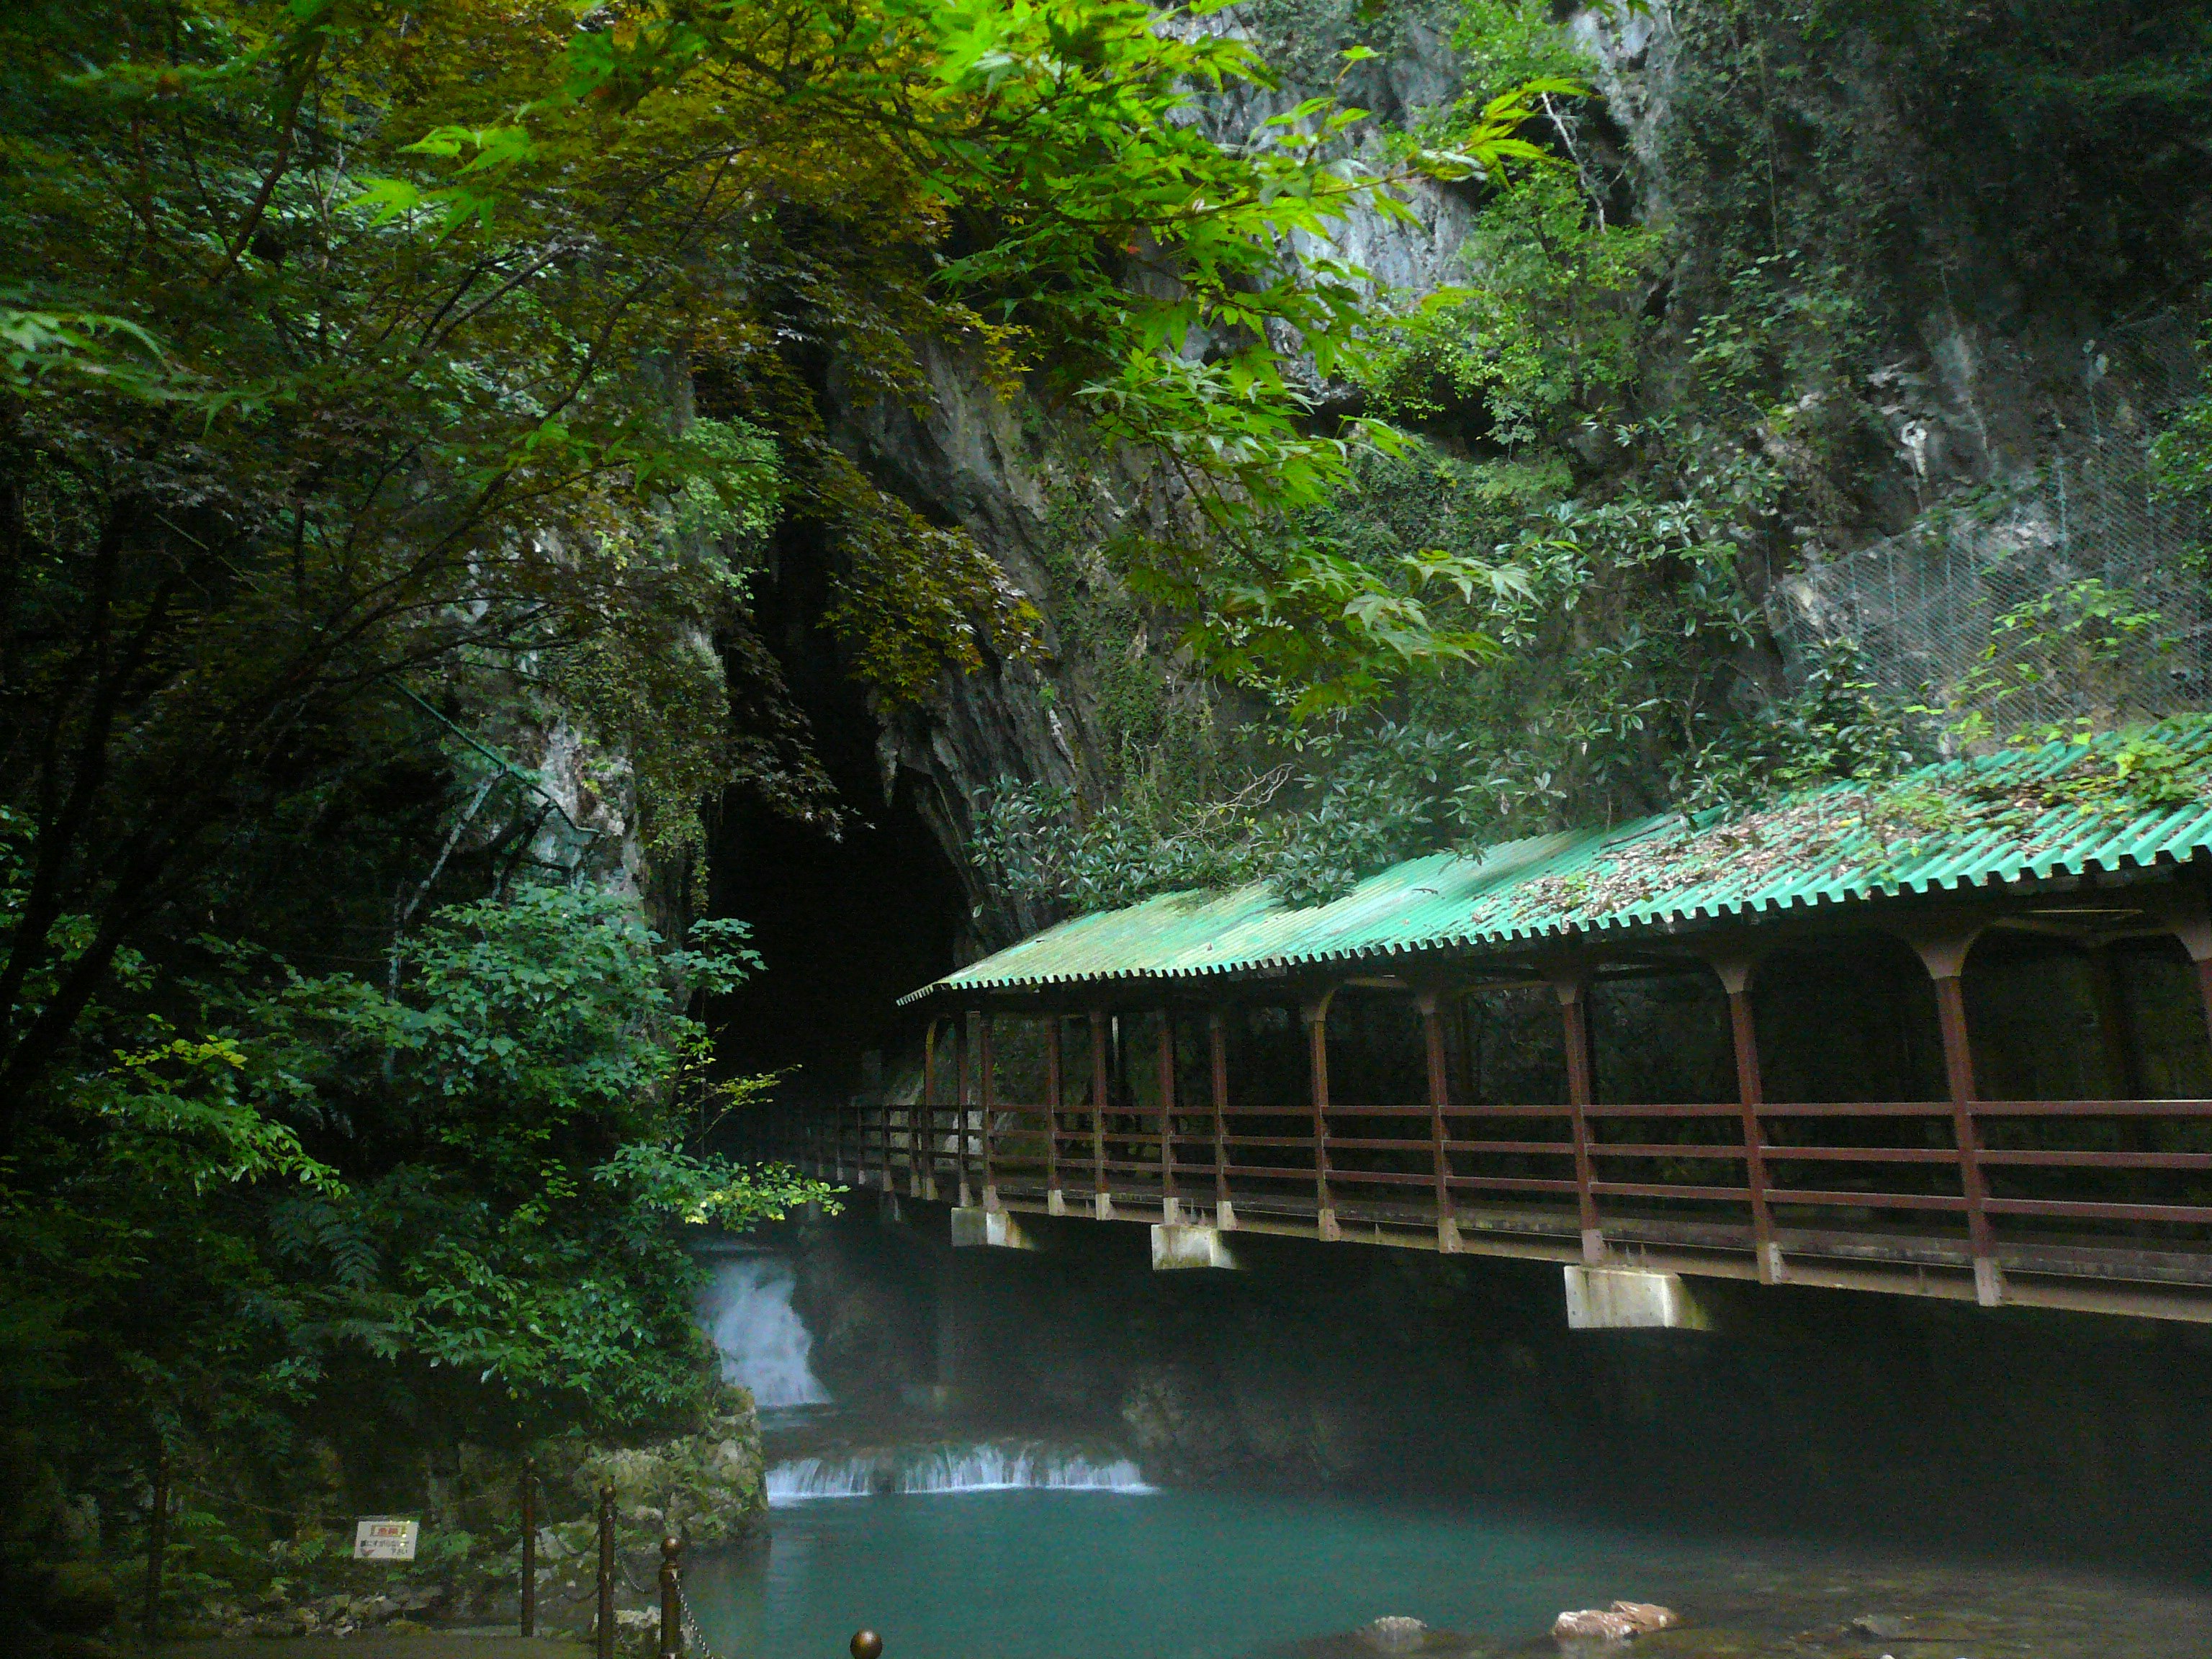 A bridge covered in green roof tiles leads into the Akiyoshidai cave, the longest in Japan, in the Akiyoshiidai National Park in Yamaguchi Prefecture's karst plateau